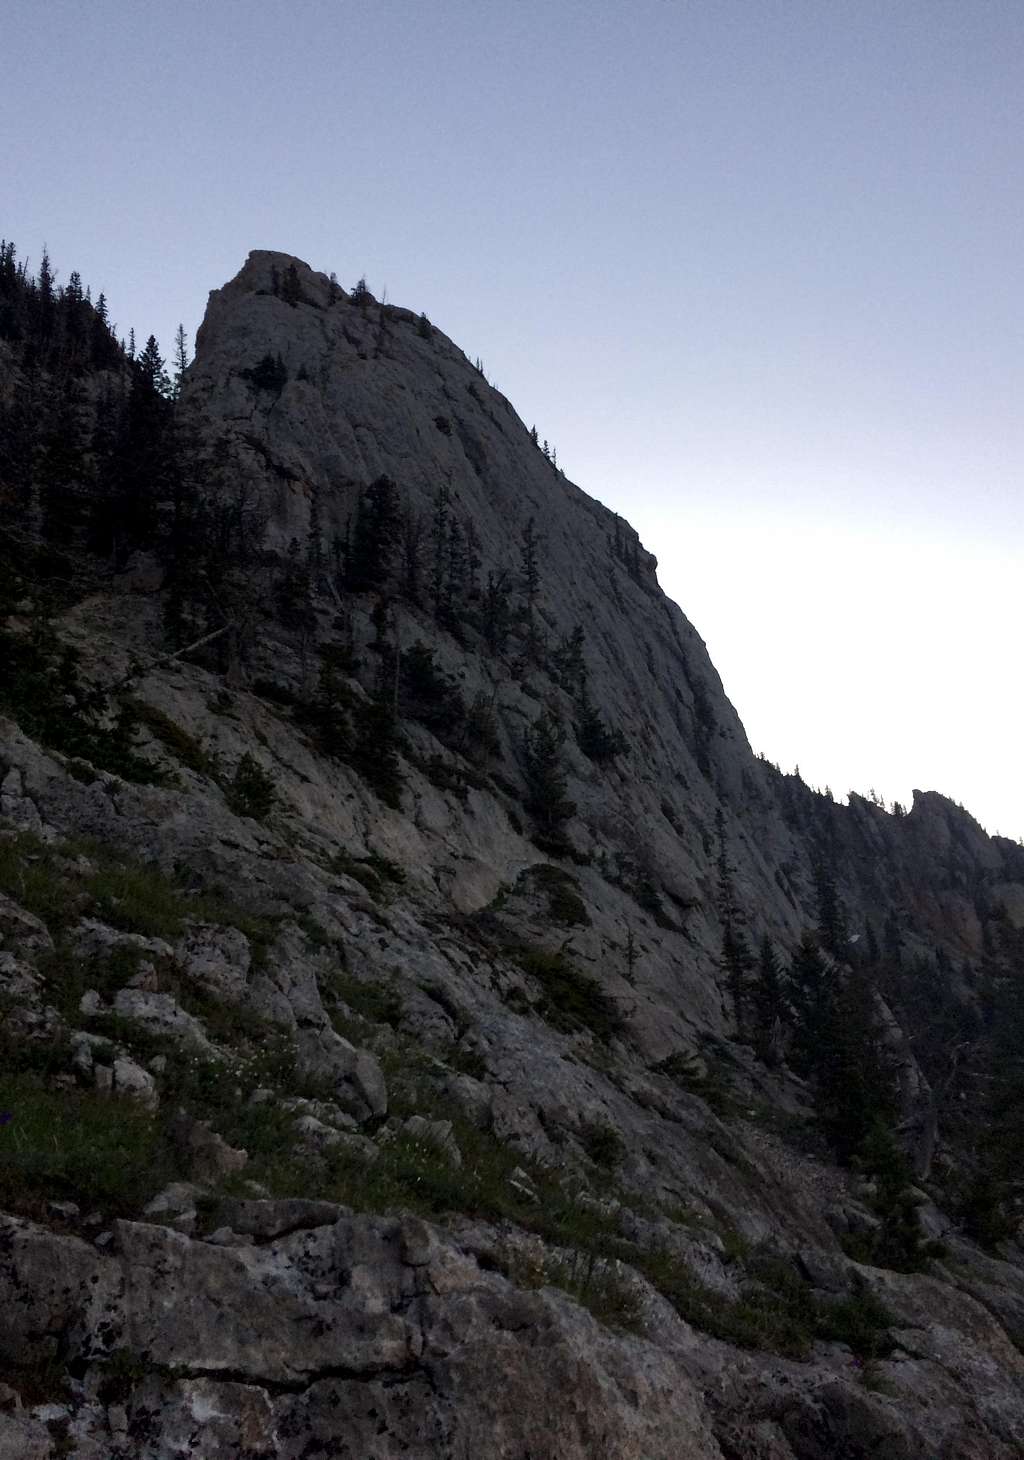 Ainger Formation Tower seen from the approach, Bridger Mountains MT